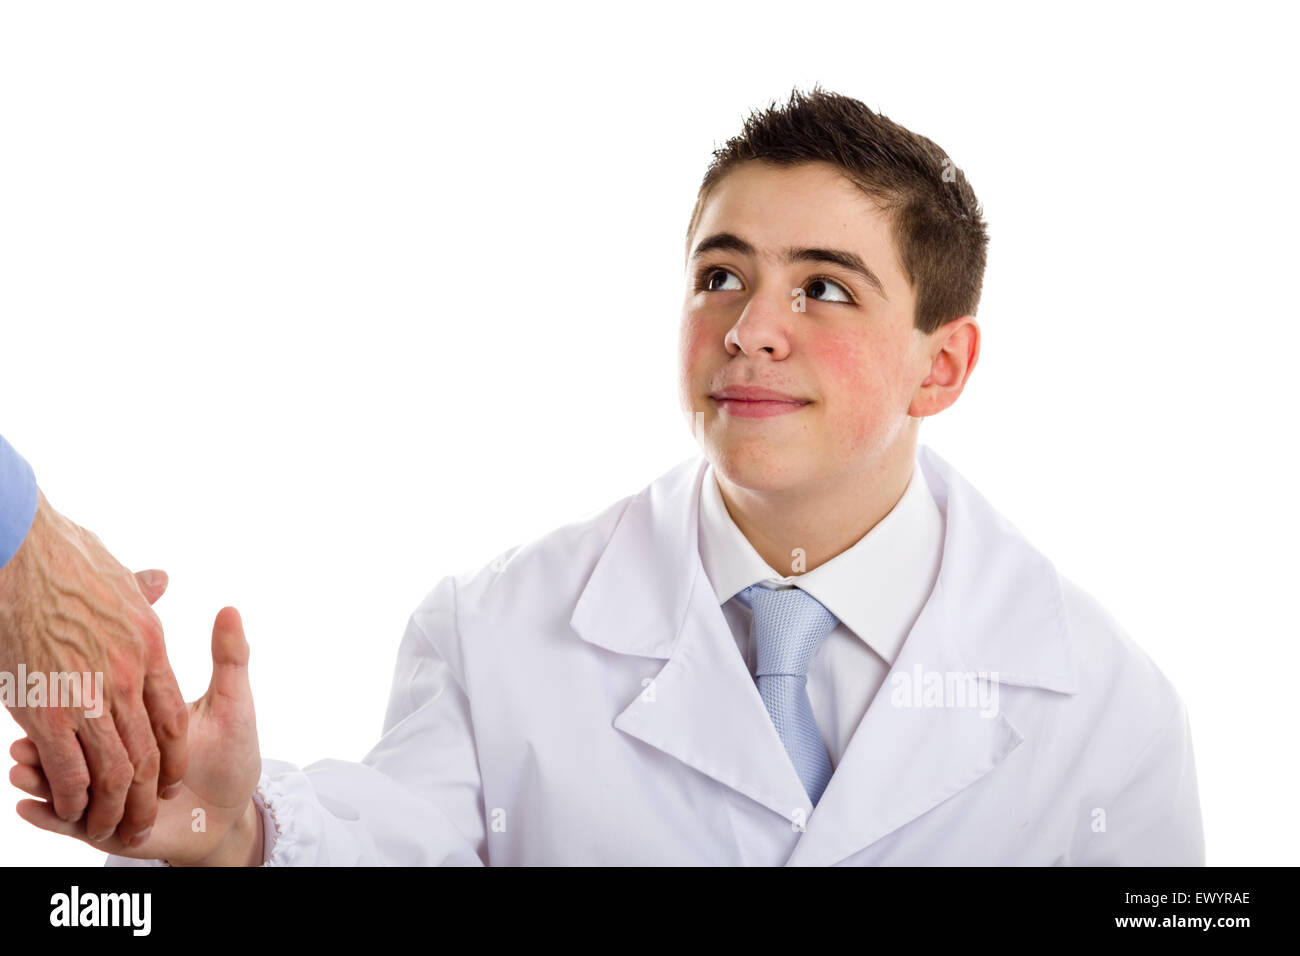 A boy doctor in white coat and blue tie helps to feel medicine more friendly: he is smiling while shaking hand. His acne skin has not ben retouched Stock Photo